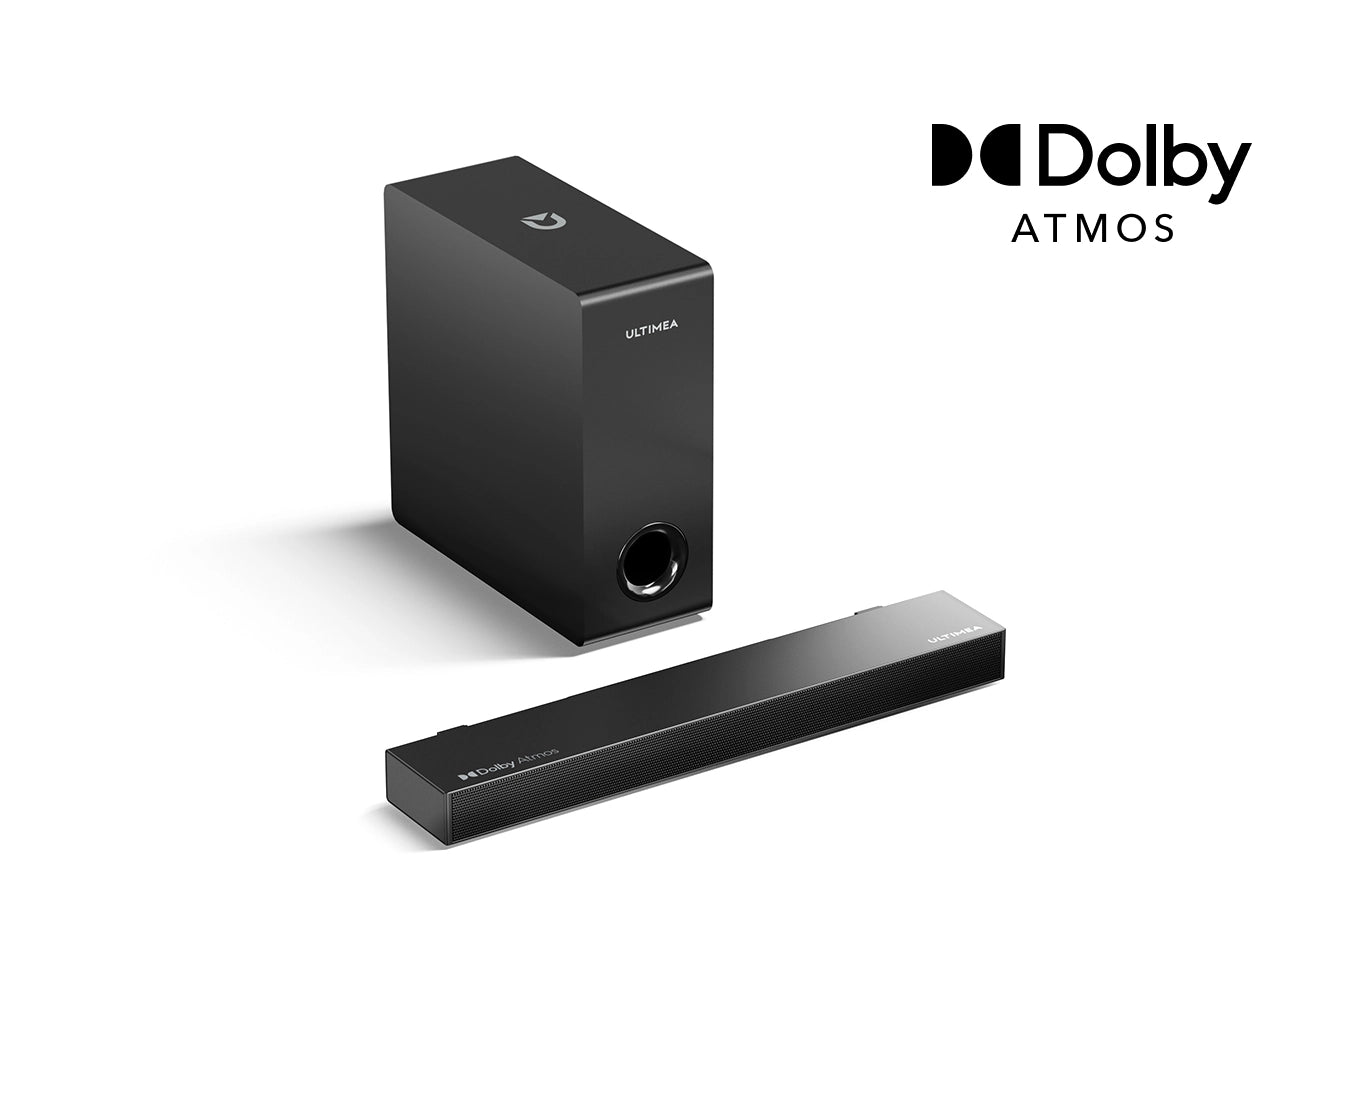 ULTIMEA 3.1.2ch Dolby Atmos Sound Bar for Smart TV, 2 Up-Firing Drivers,  390W Peak Power Soundbar with Subwoofer, 4K Dolby Vision HDR Pass-Through